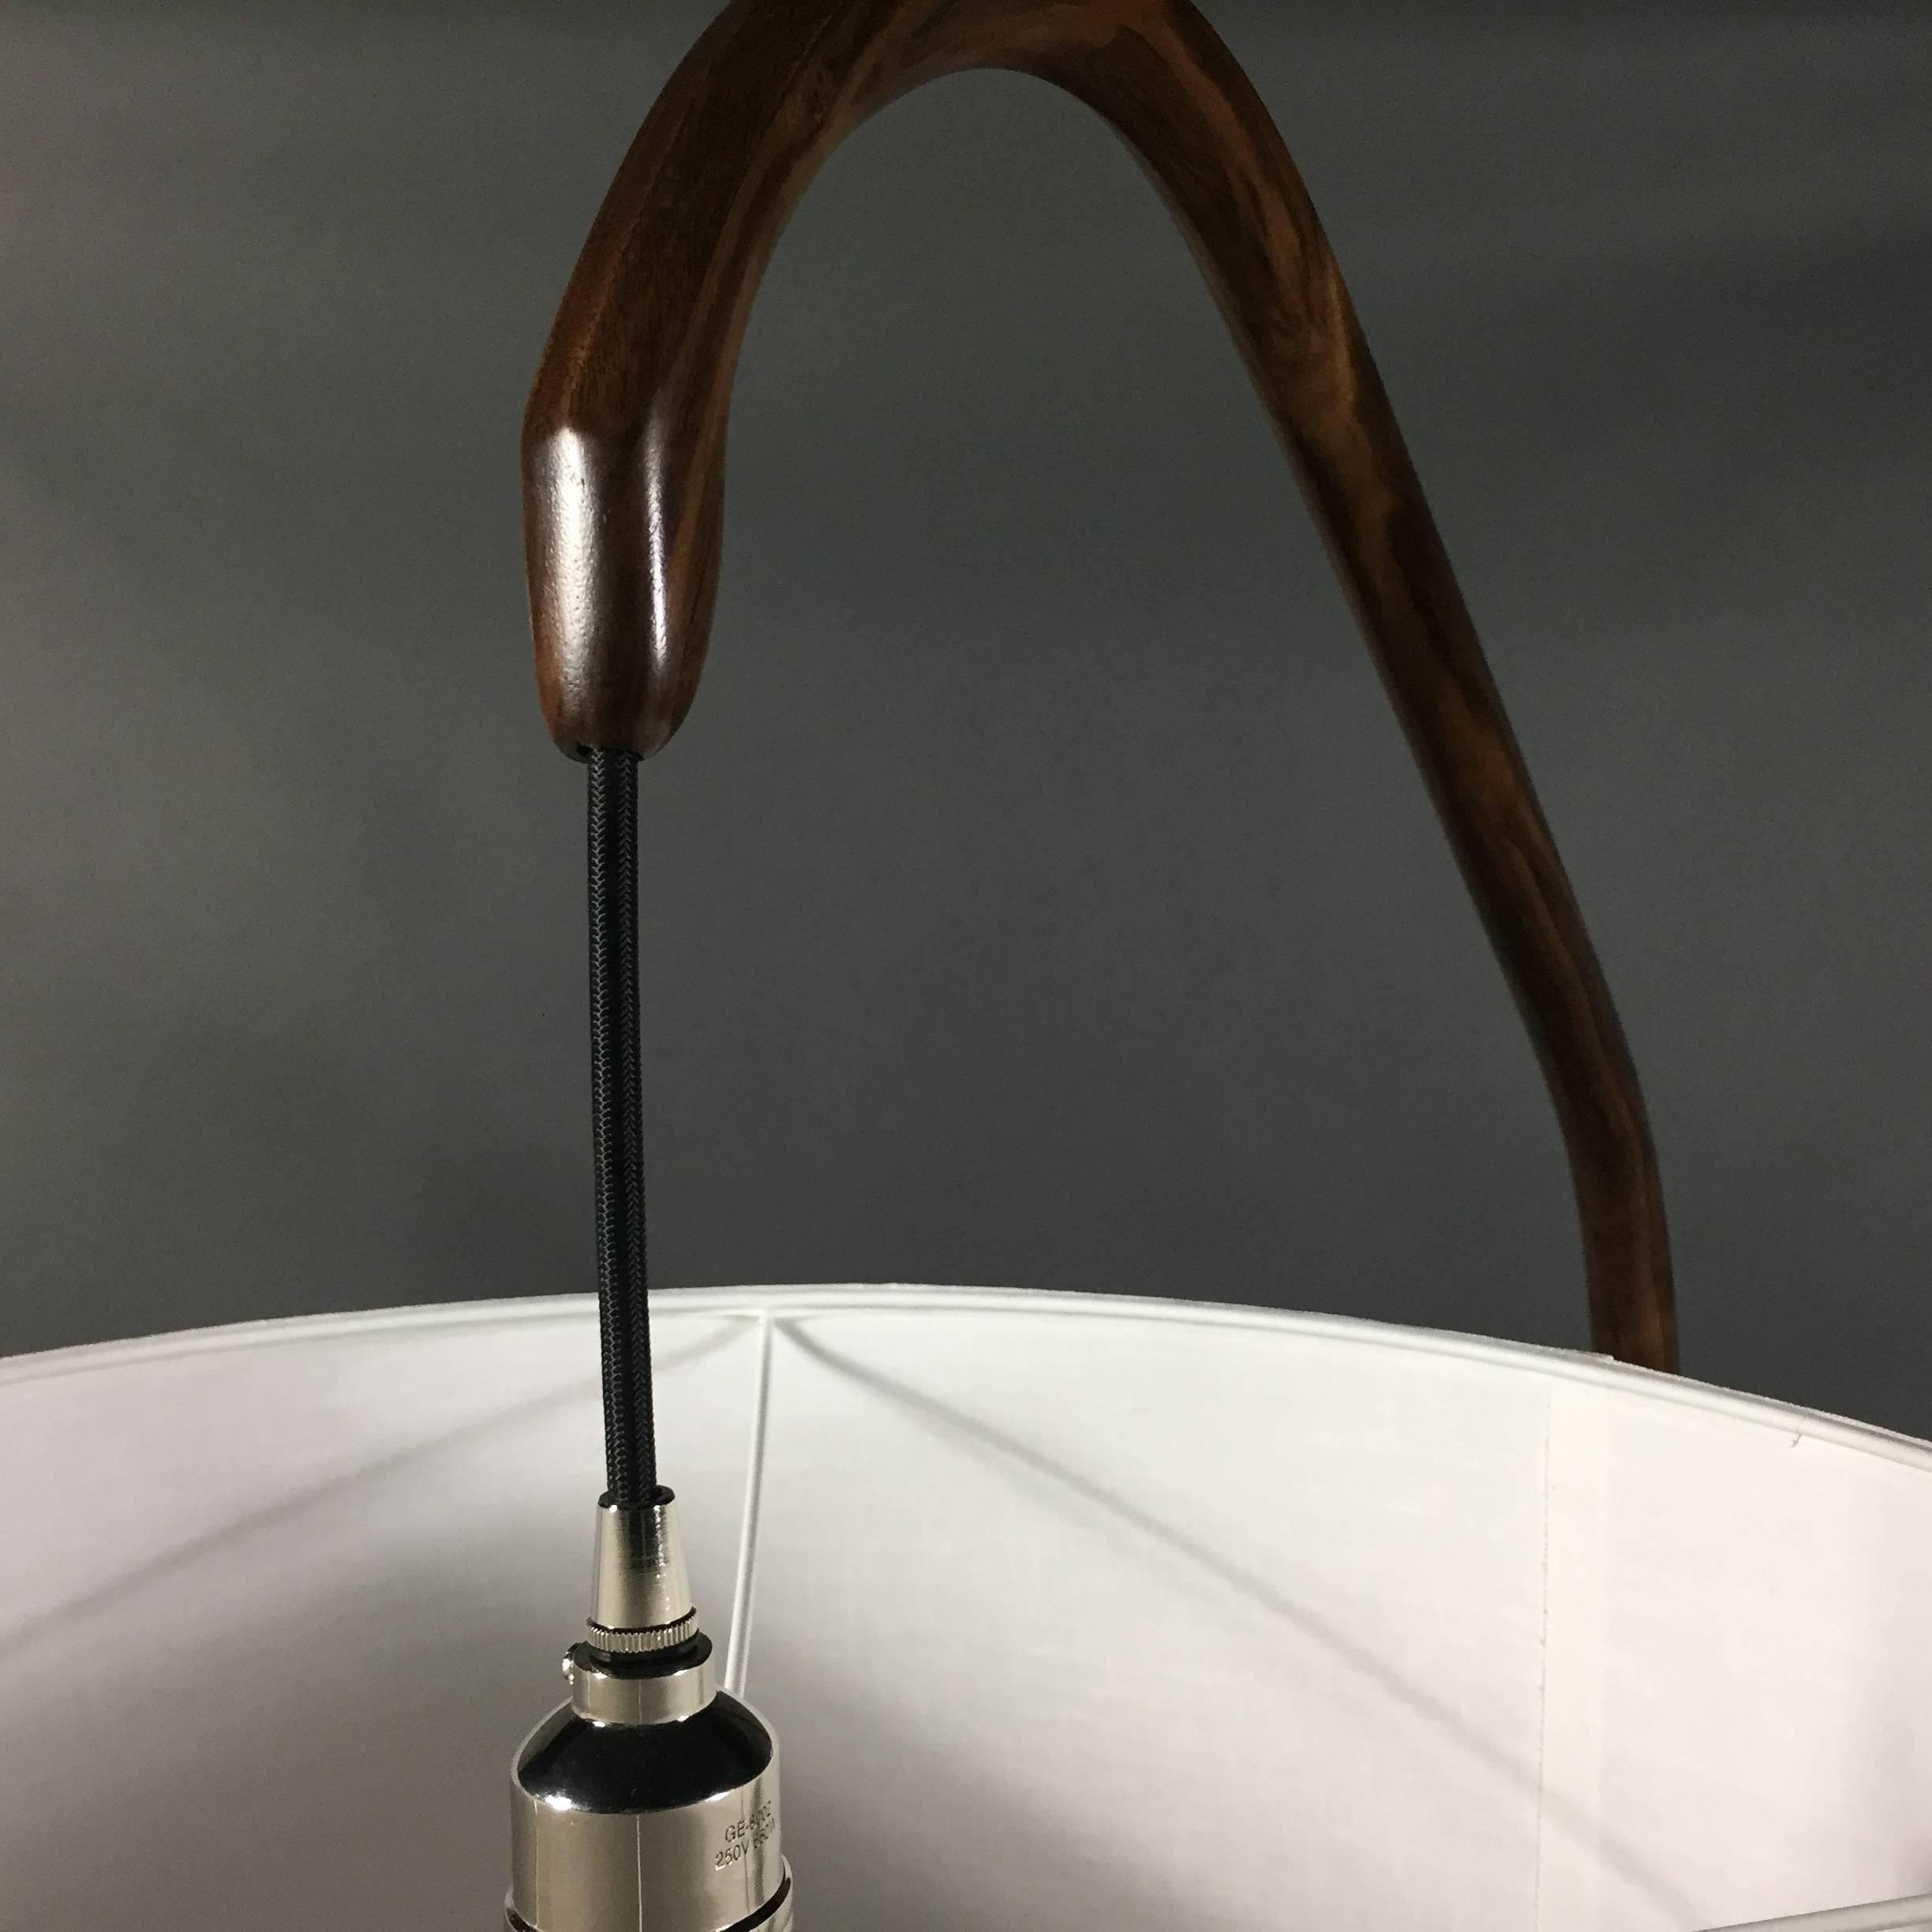 Daniel Oates Steambent Floor Lamp in Walnut, 21st Century, USA In Excellent Condition For Sale In Hudson, NY